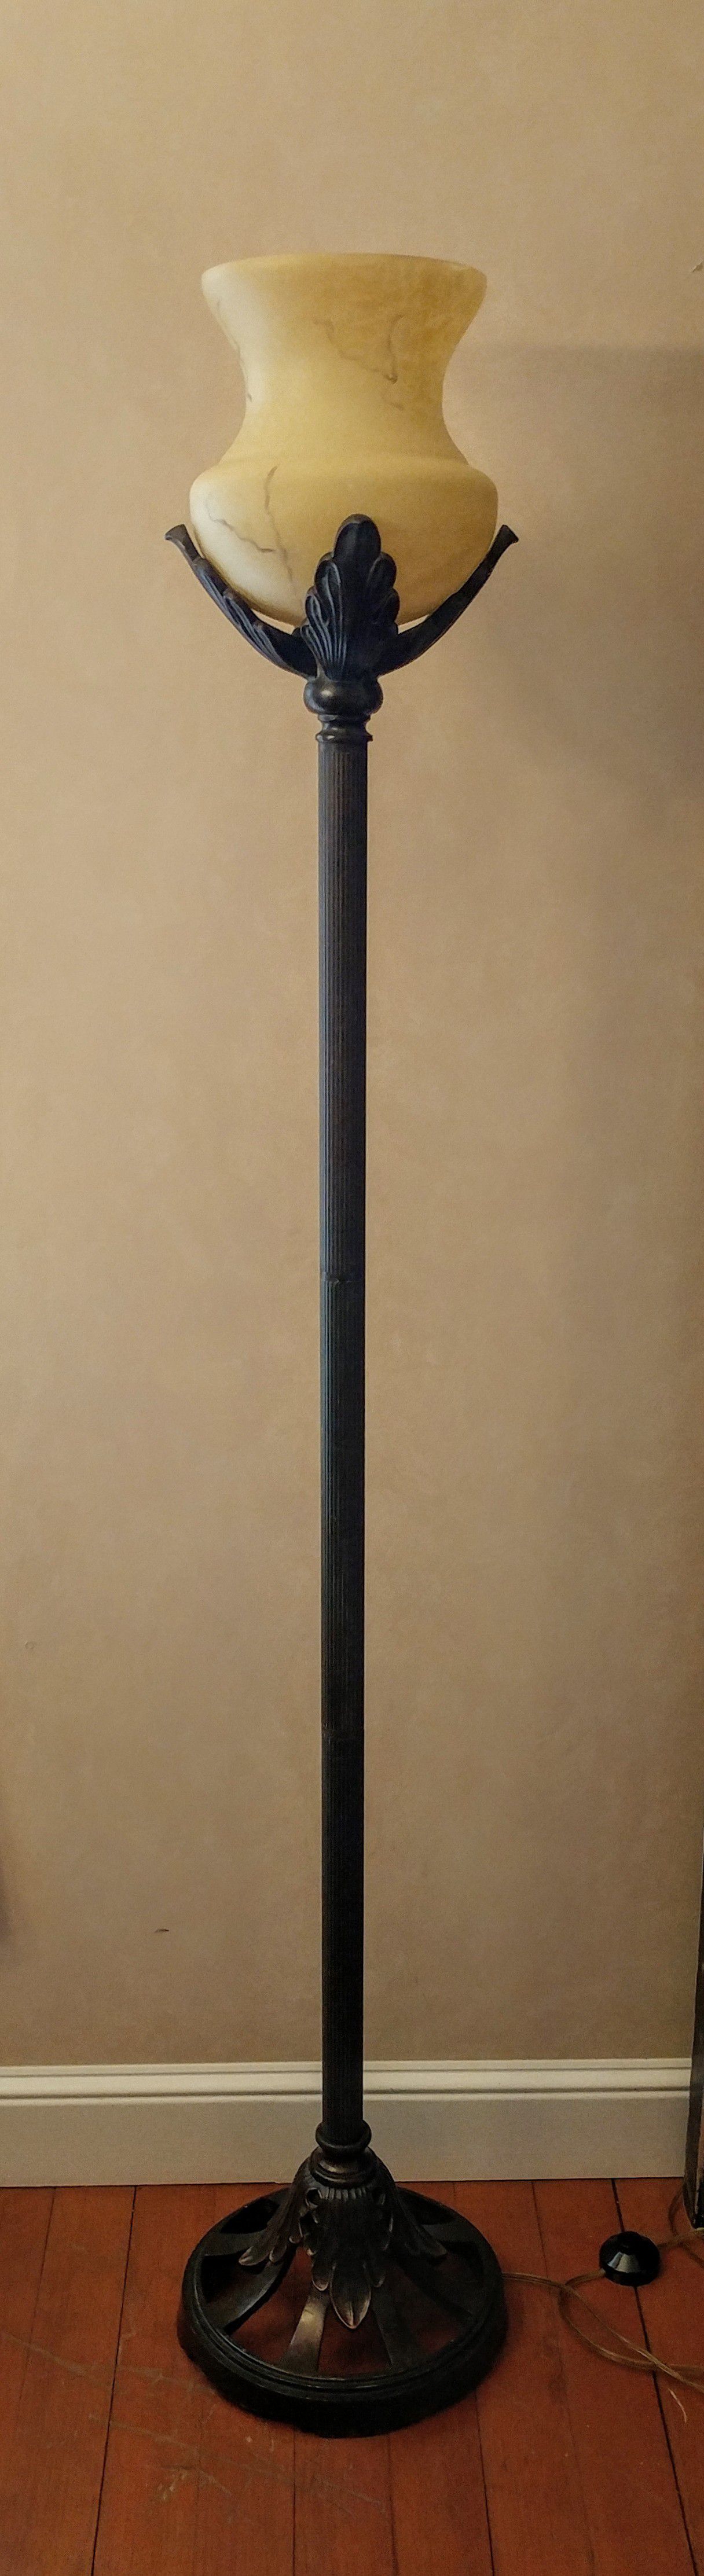 Torchiere Style Floor Lamp